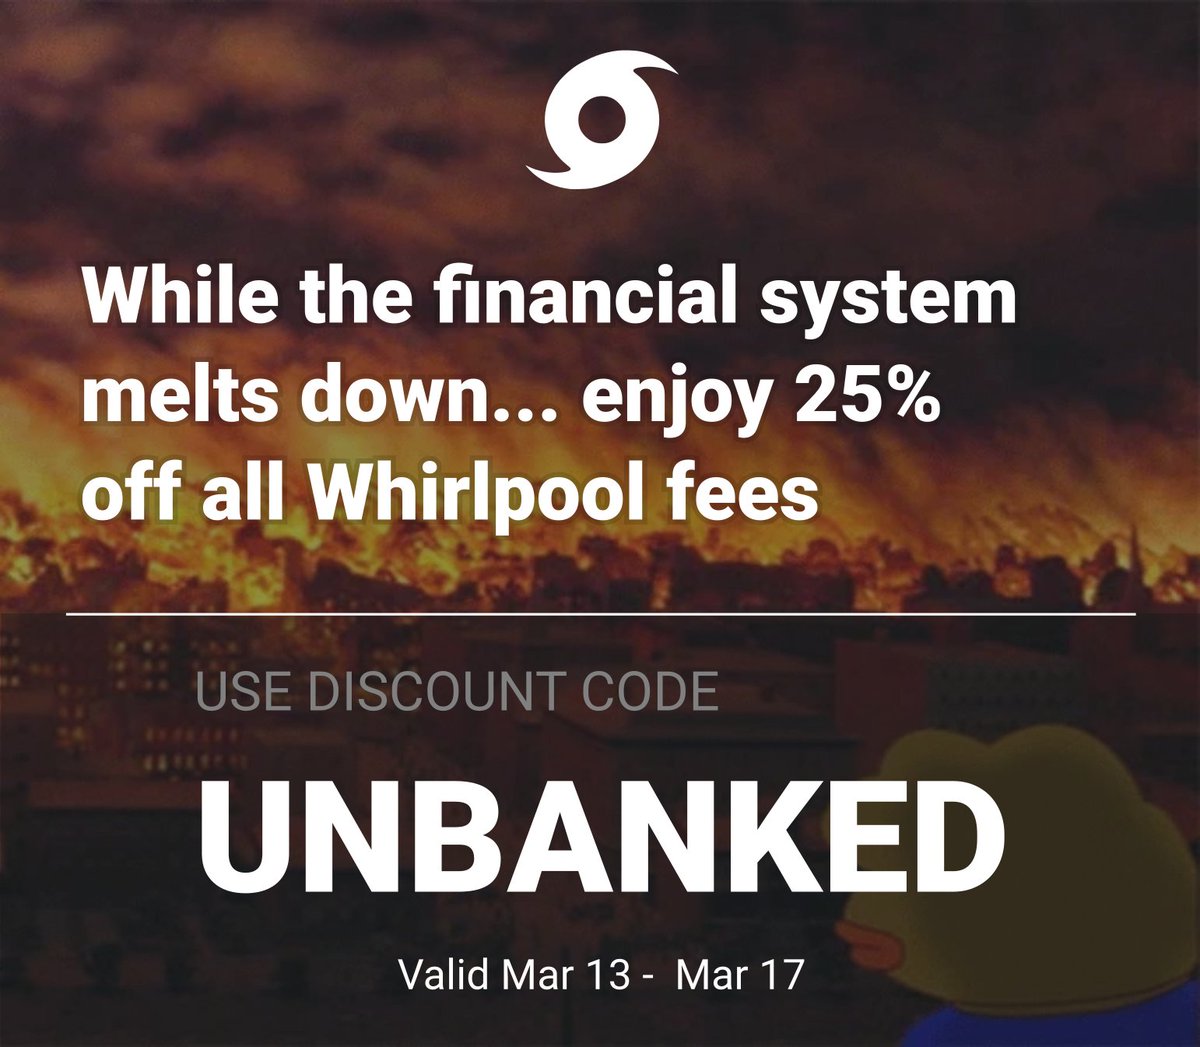 We unbanked ourselves in 2013. Since then have been dedicated to building tools needed for a private, censorship resistant, market driven shadow economy. Whirlpool is a major part of that vision. While legacy implodes enjoy 25% off all Whirlpool fees. Use the code UNBANKED